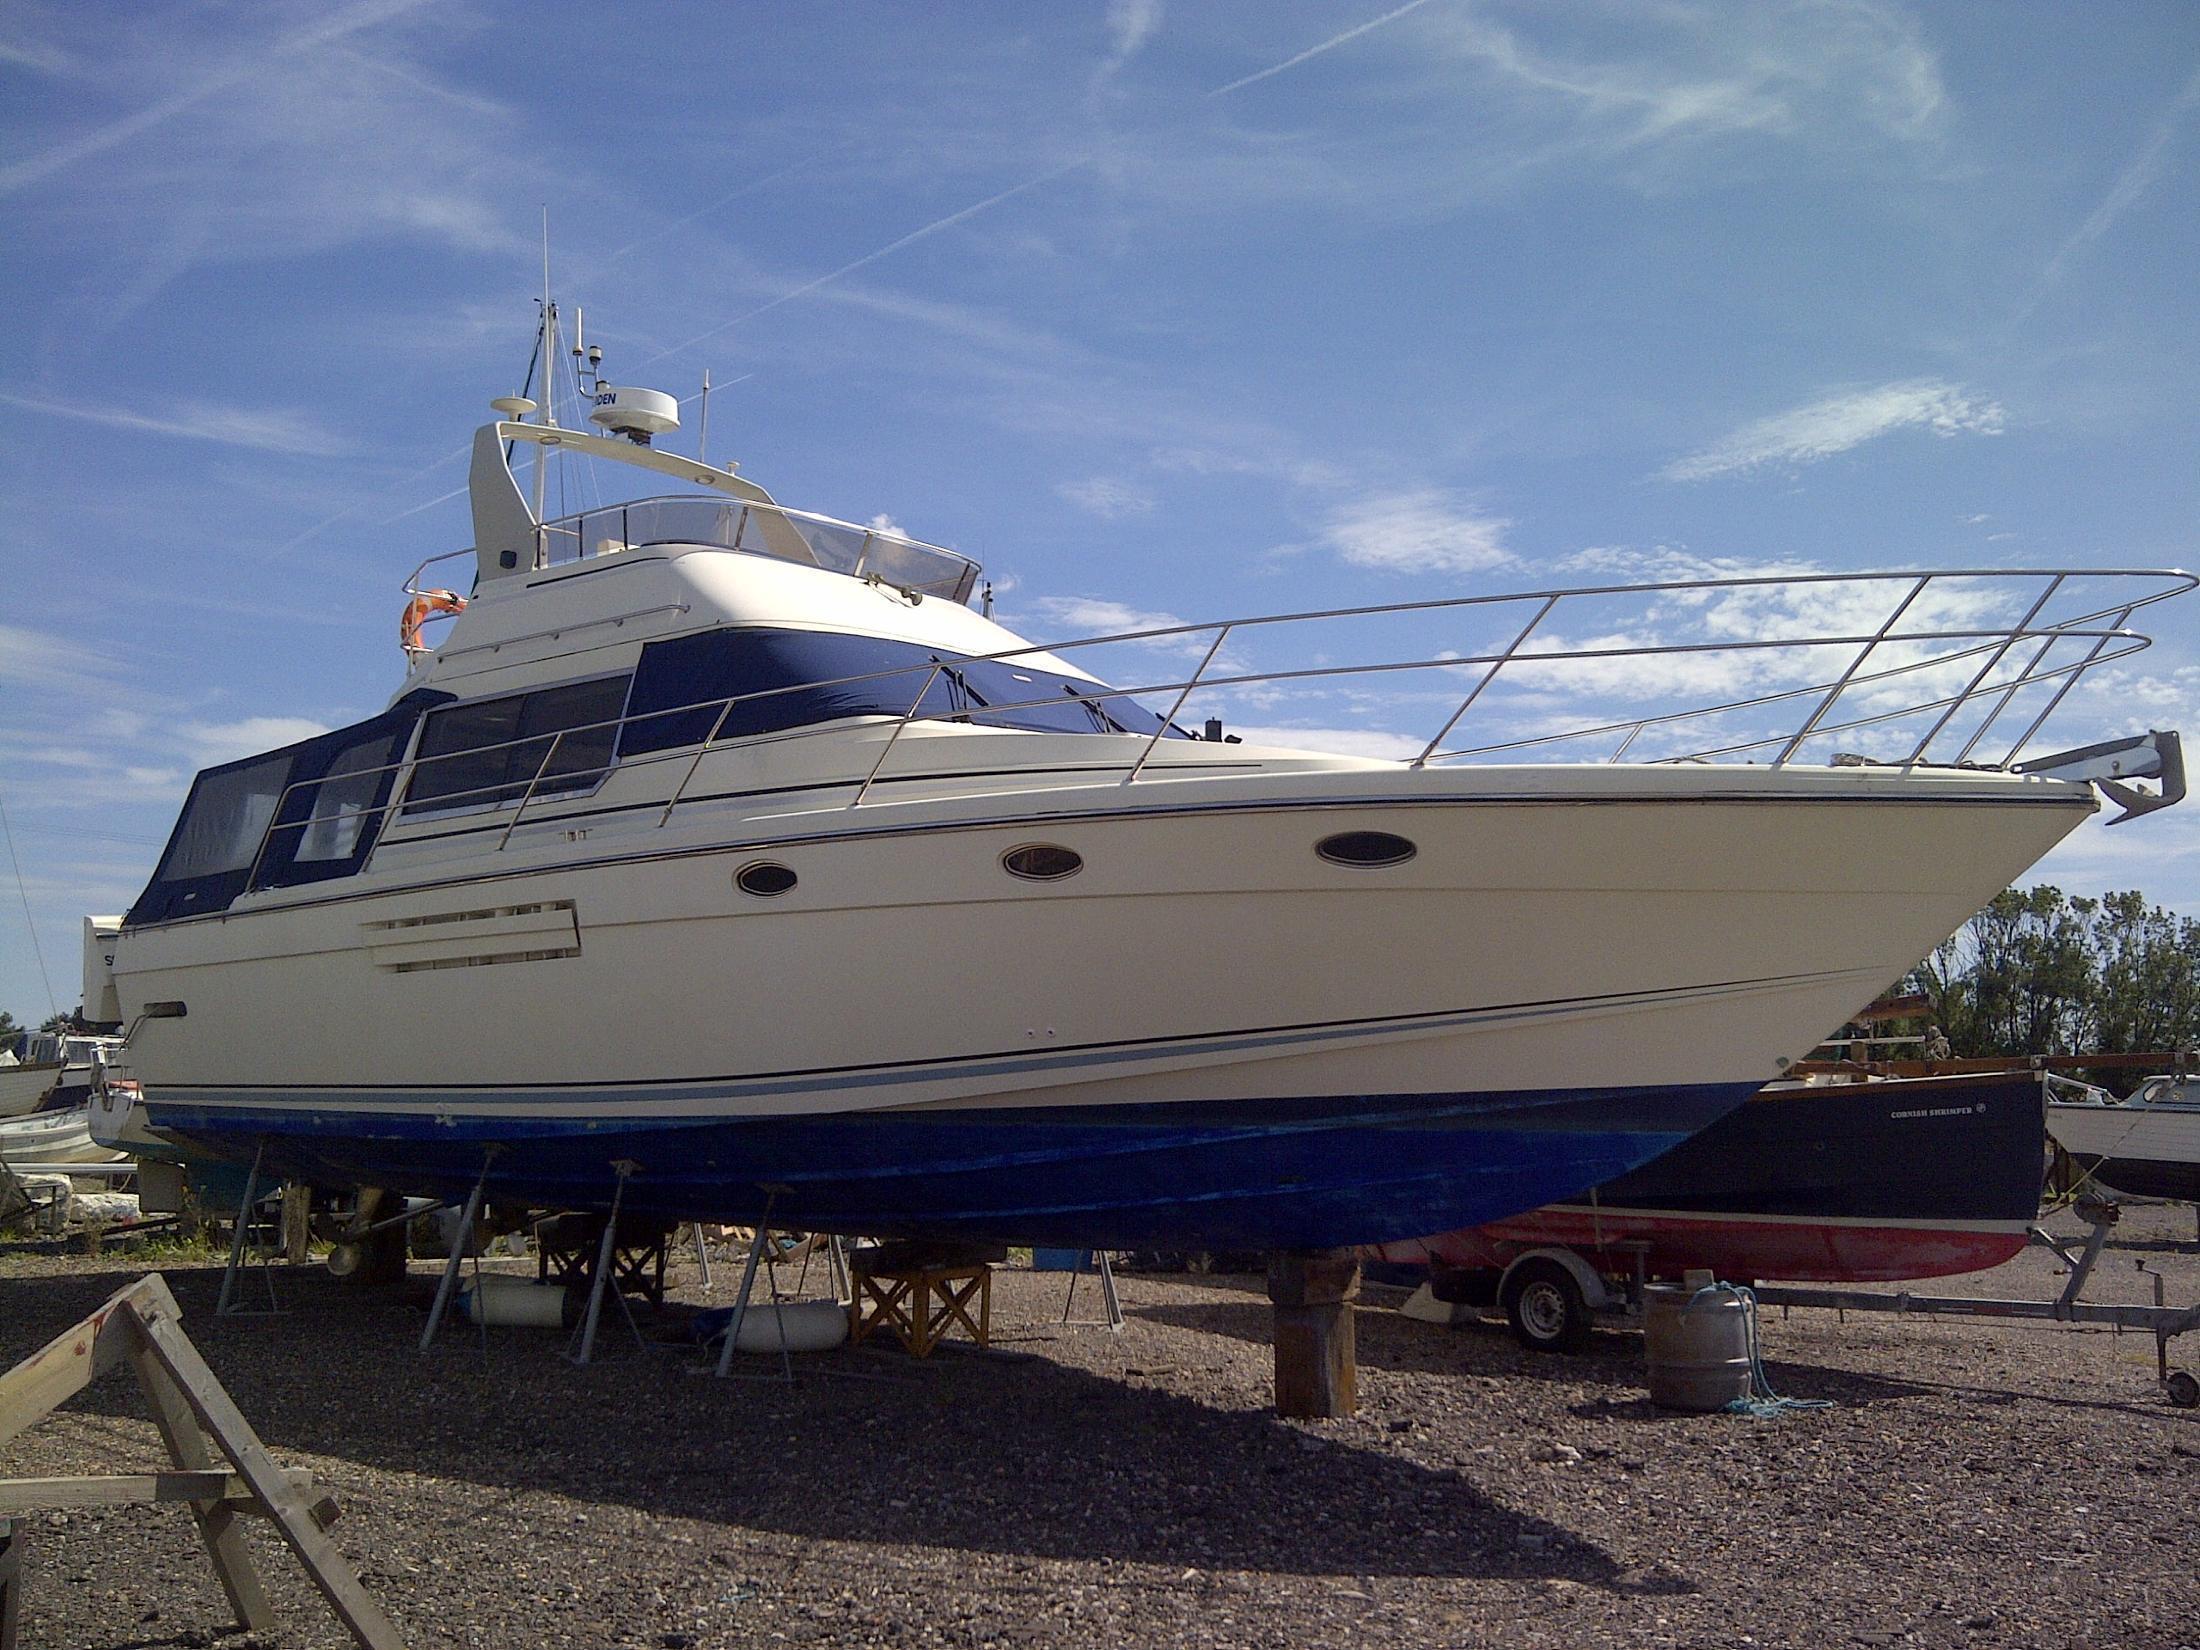 Westerly Whitewater Wolf 46, Bradwell on Sea, Essex